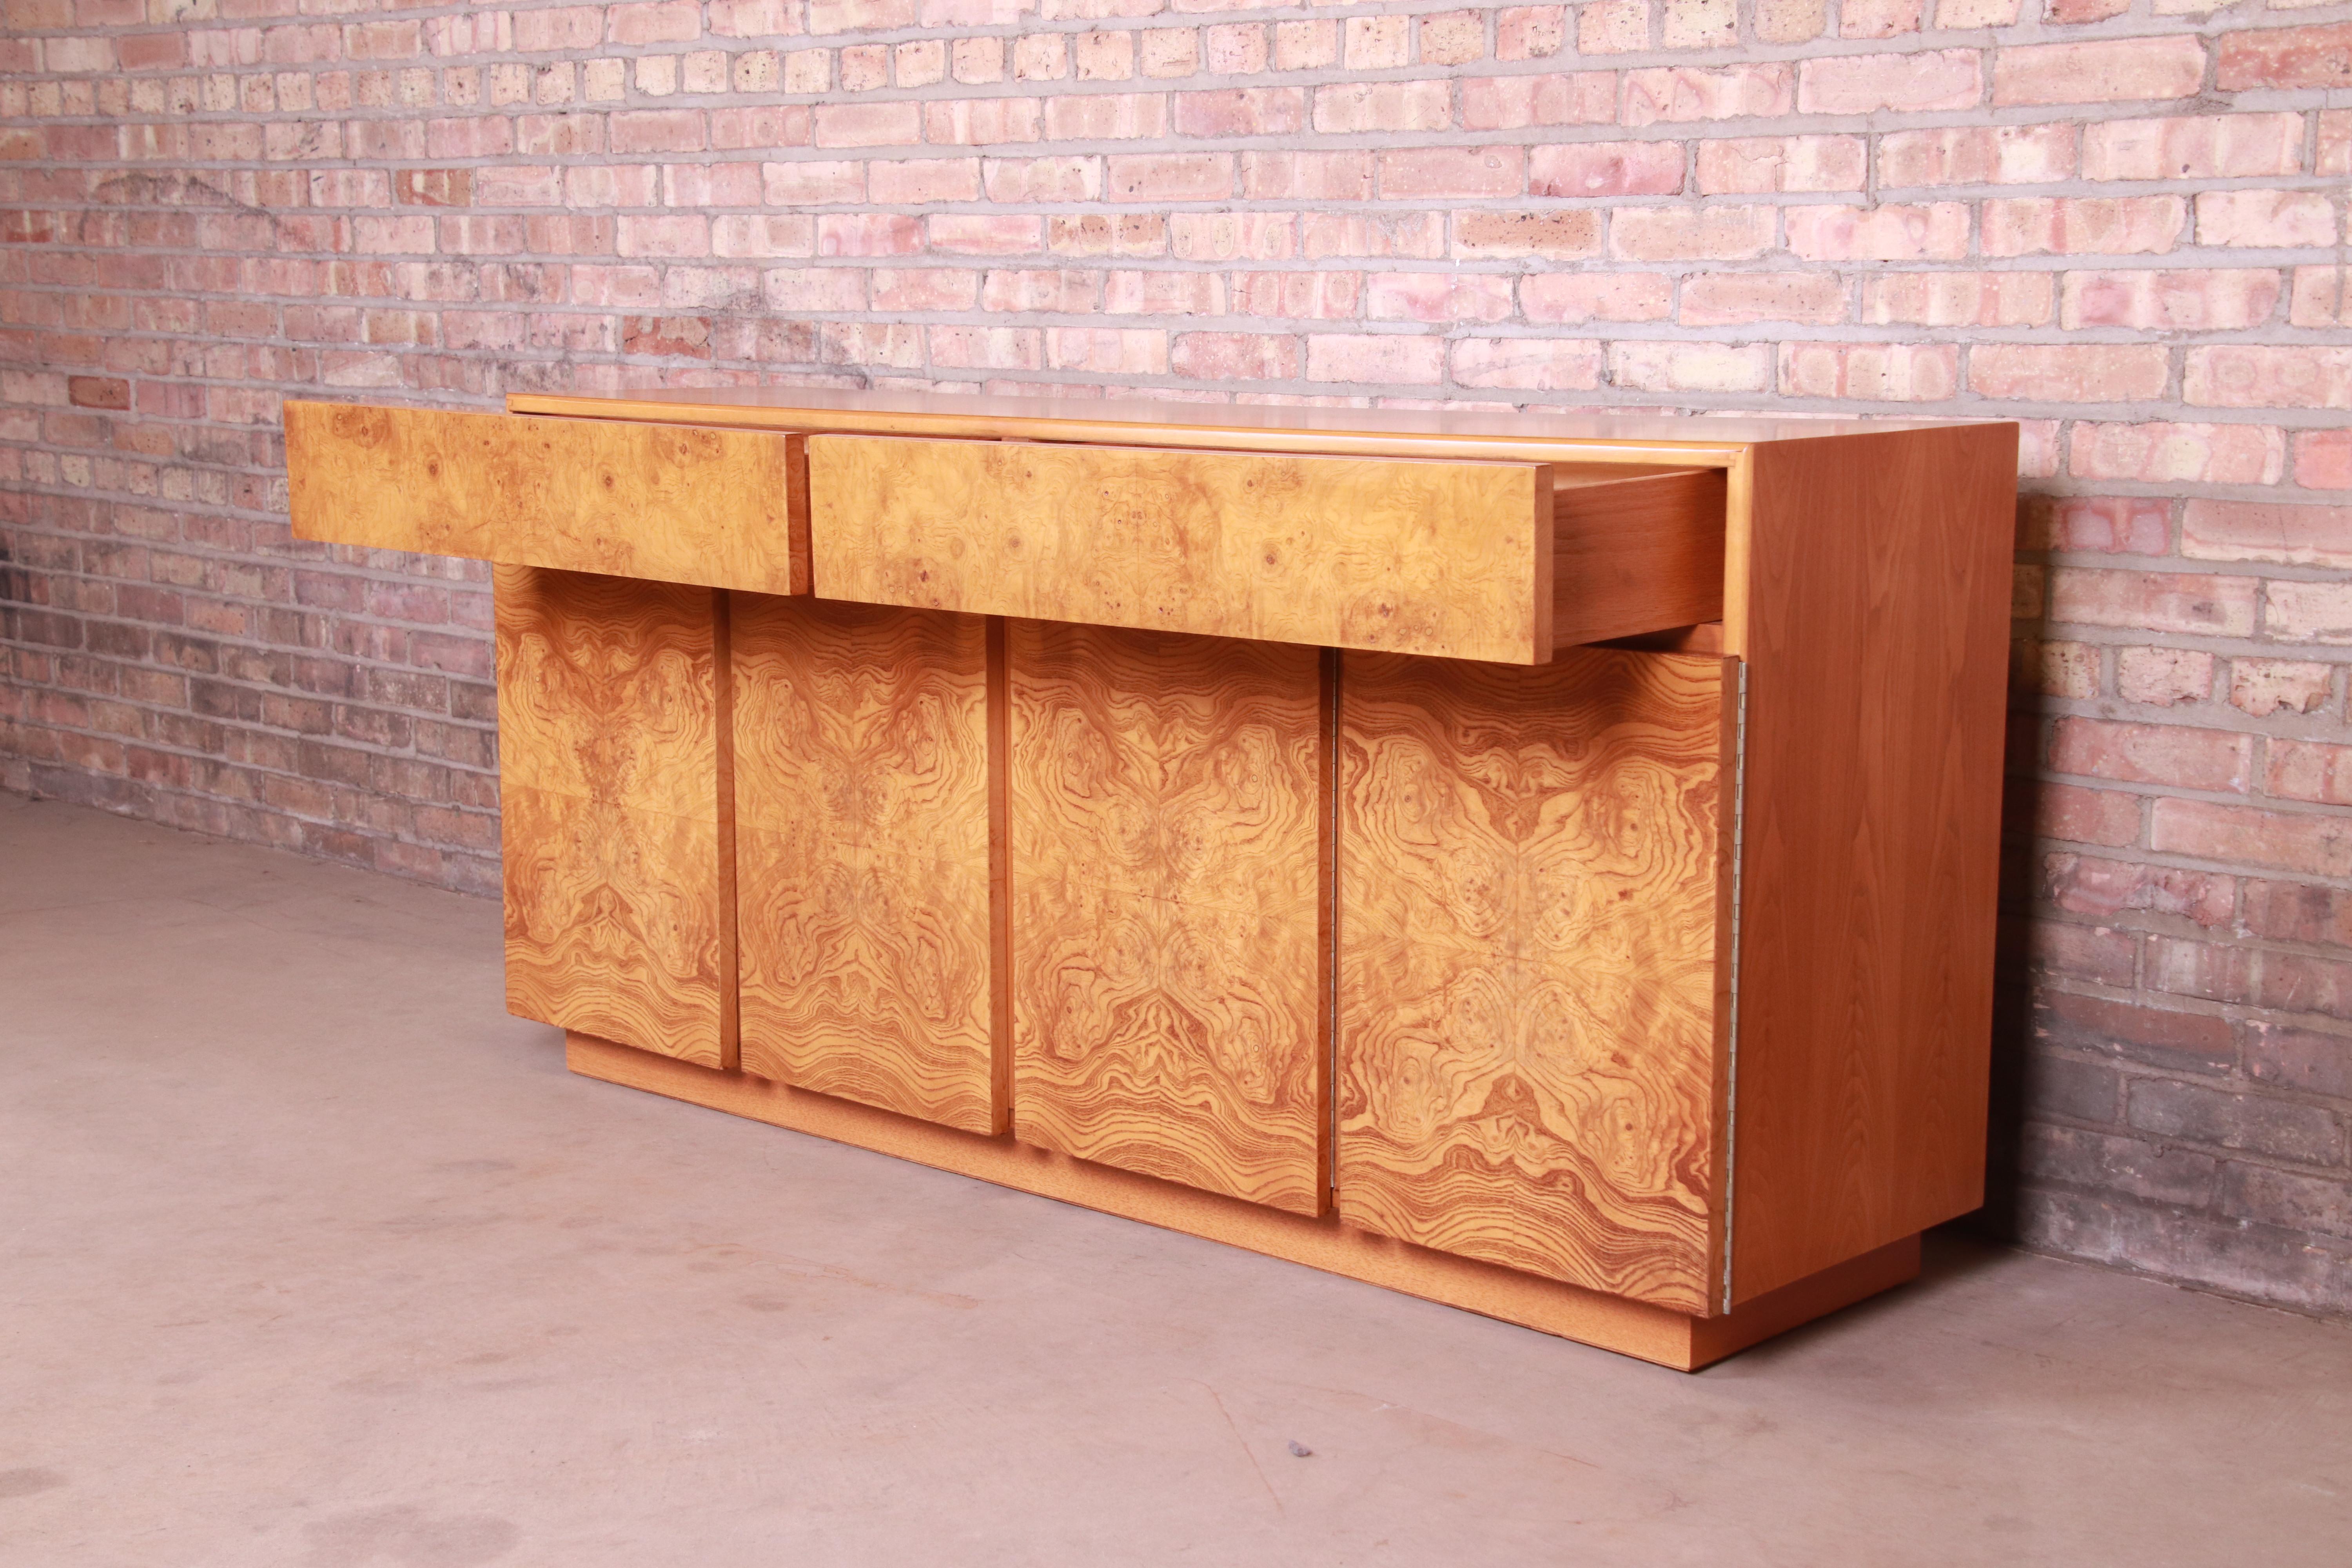 Ash Milo Baughman Style Burl Wood Sideboard Credenza by Lane, Newly Refinished